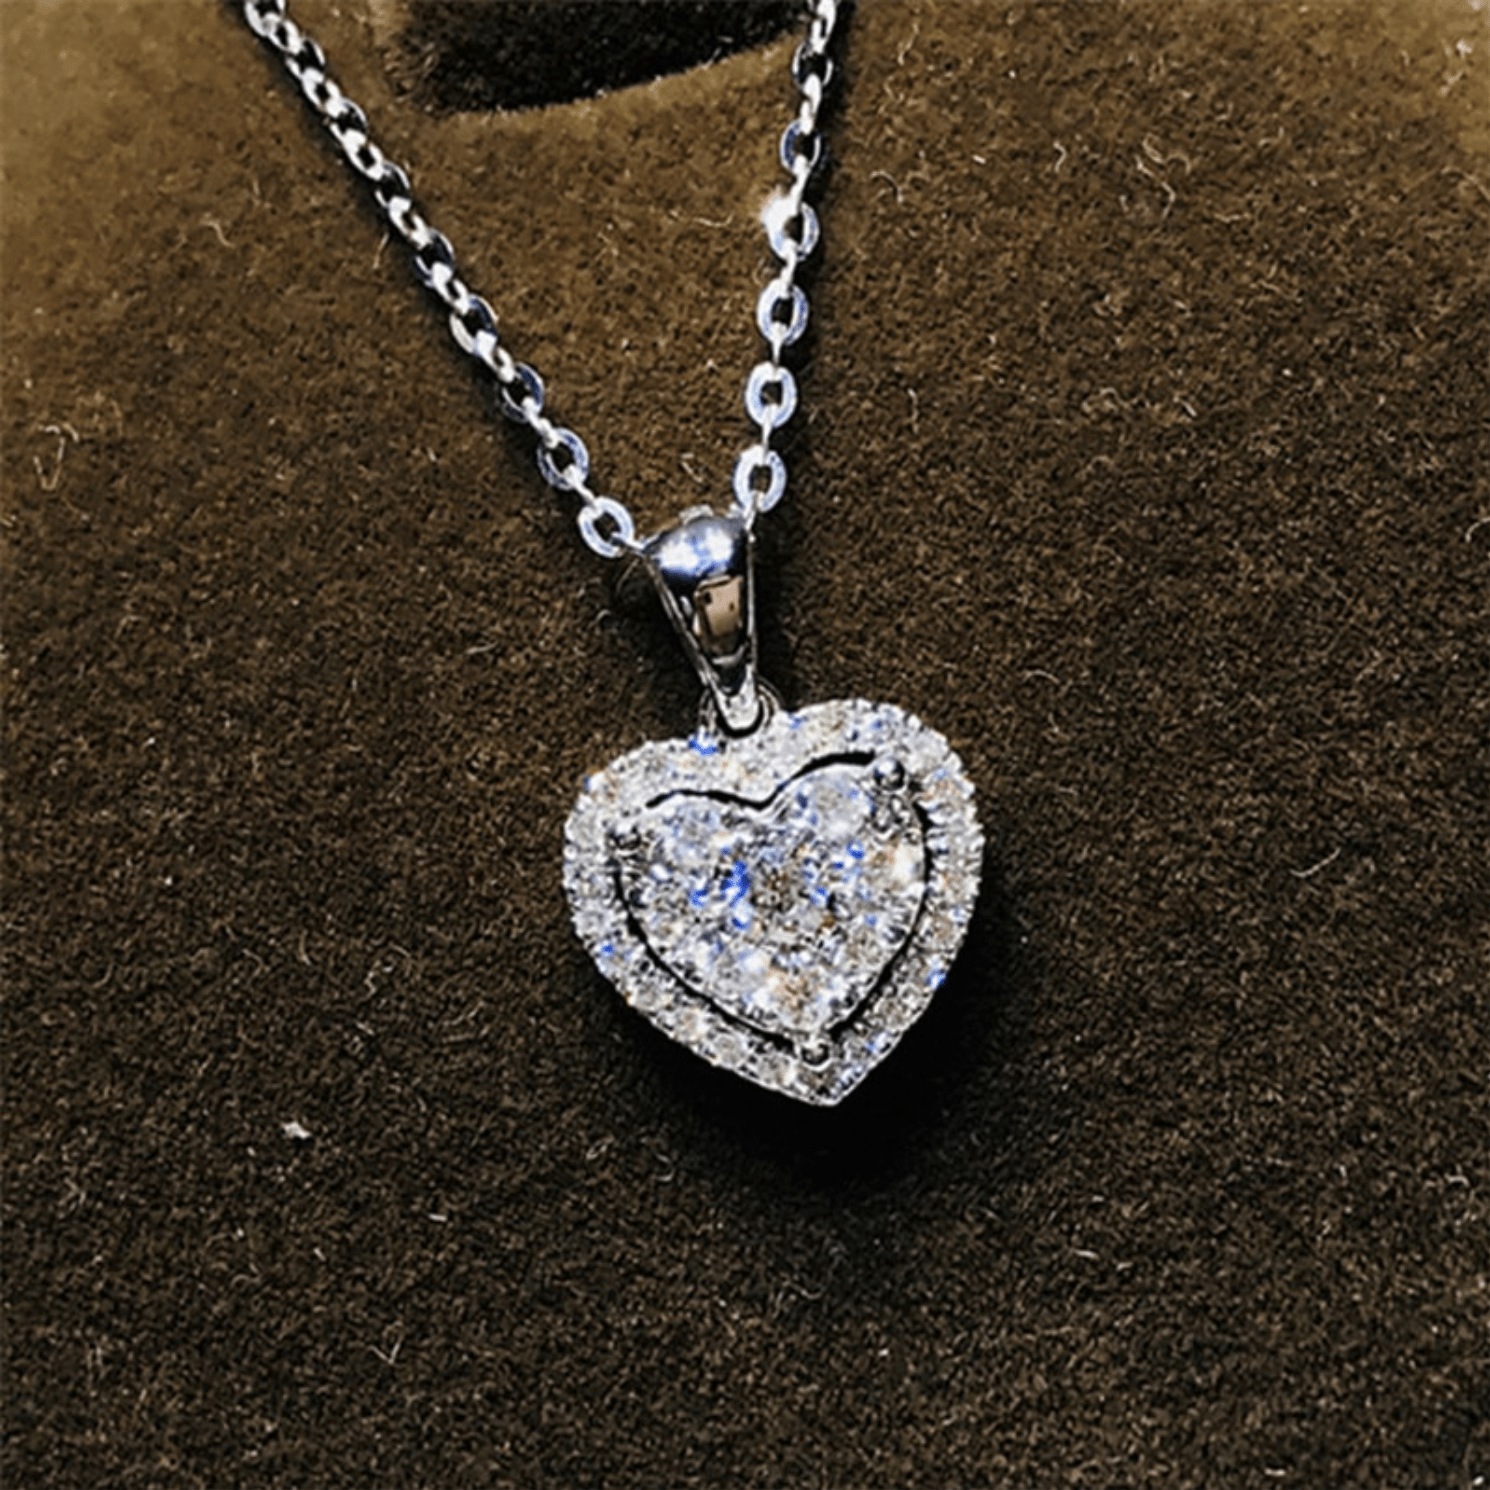 The Evelyn Heart Necklace - I Spy Jewelry